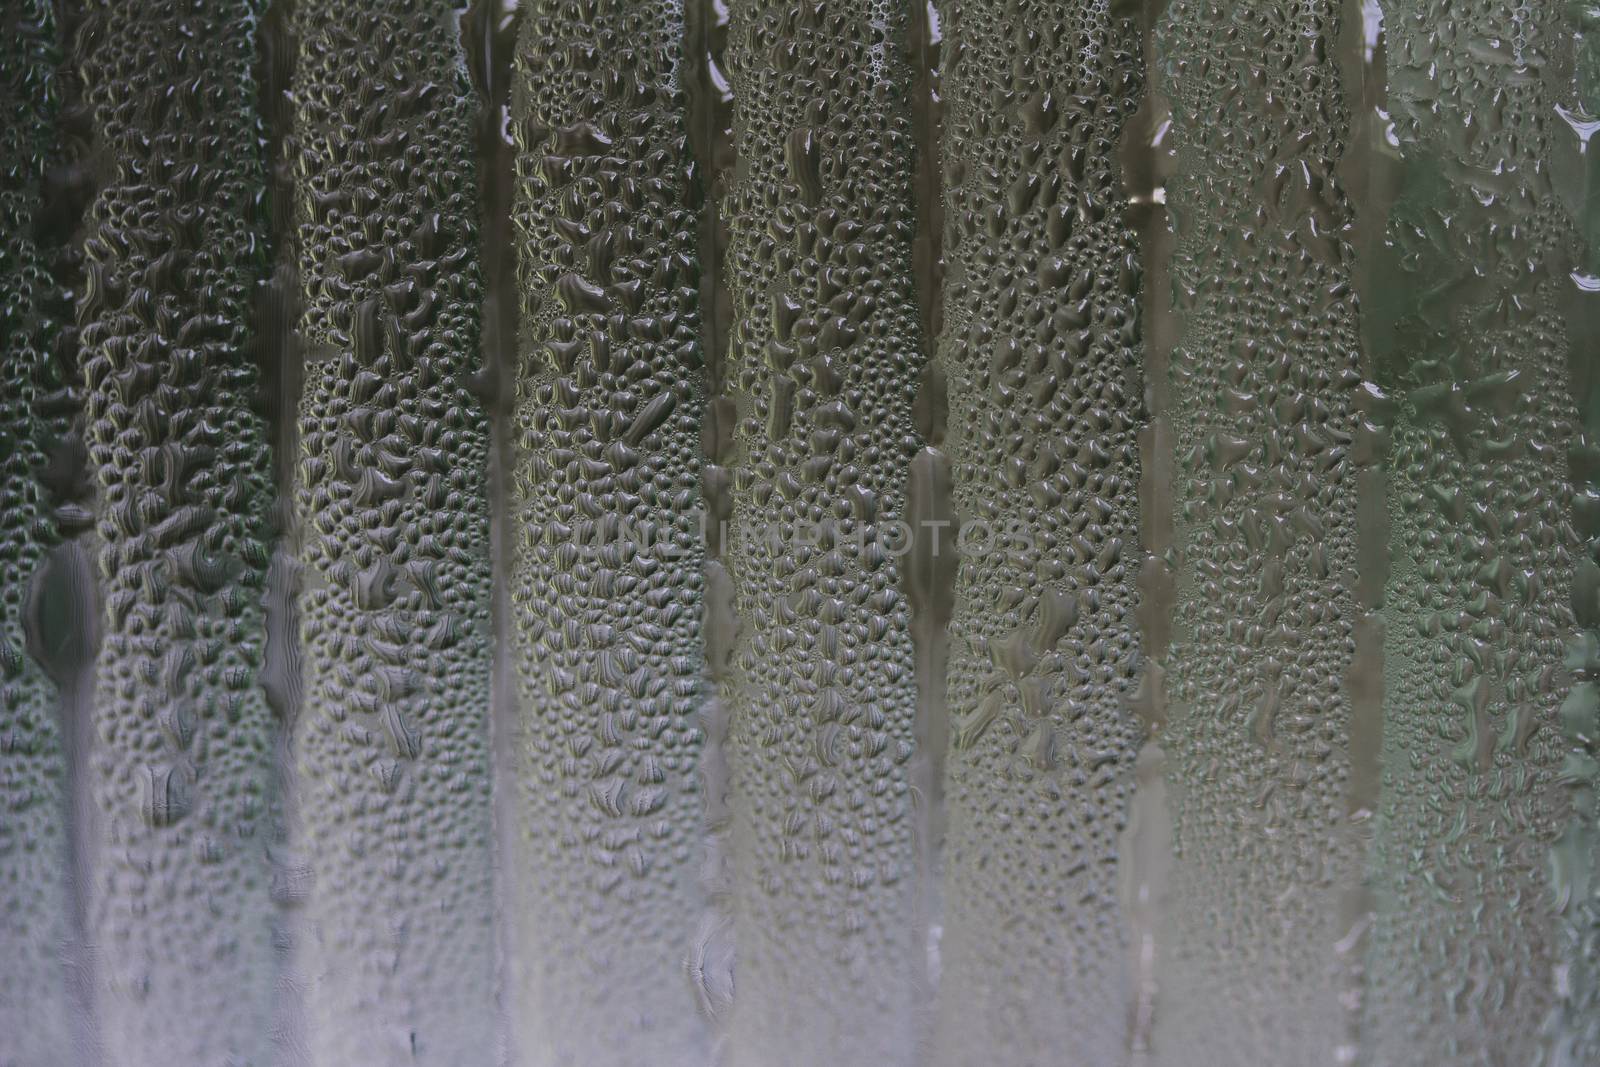 a jar covered with water condensation droplets lined up 